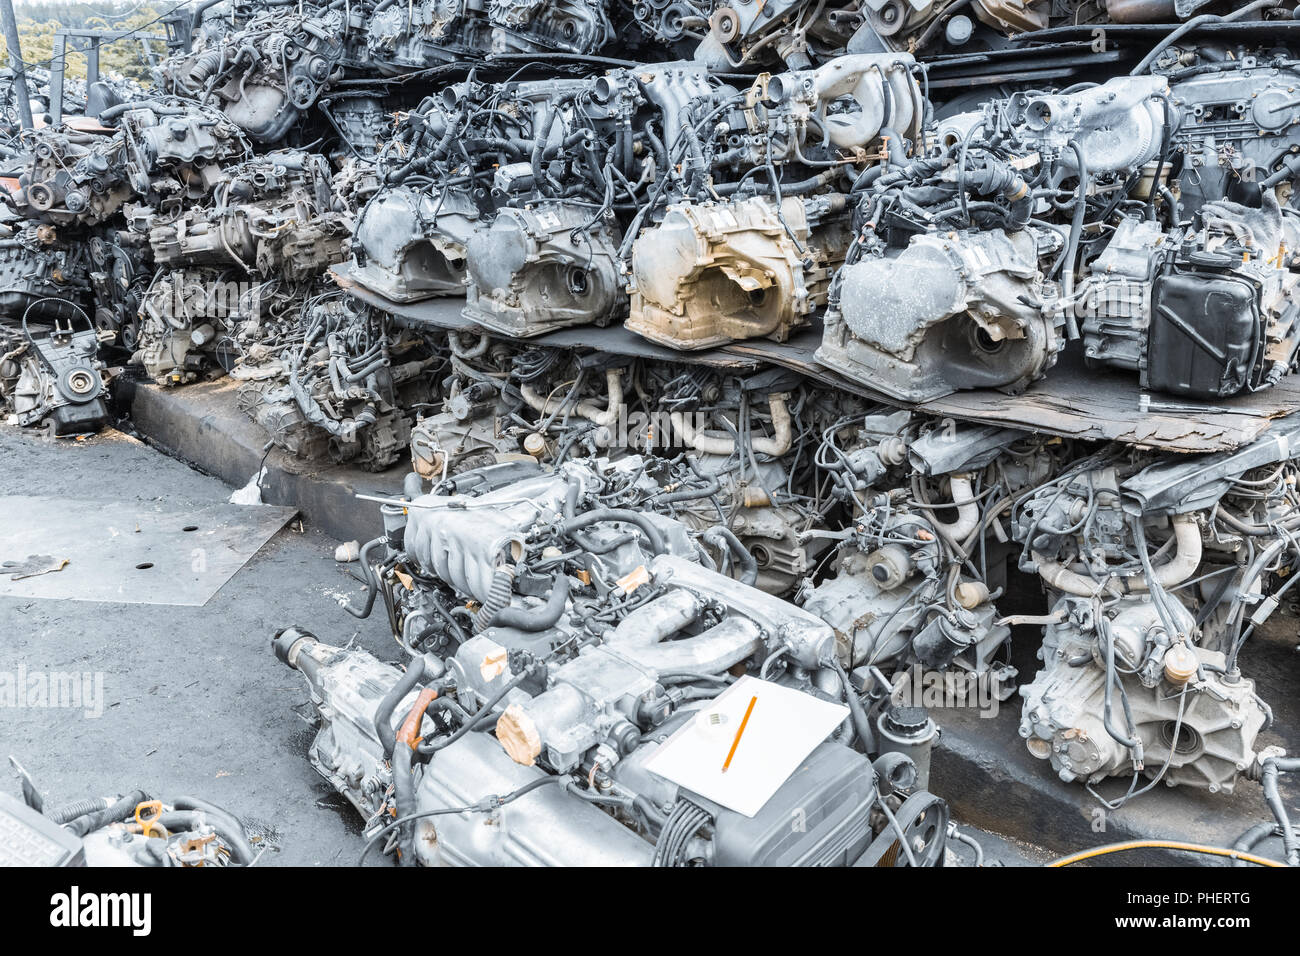 car engines for recycling Stock Photo